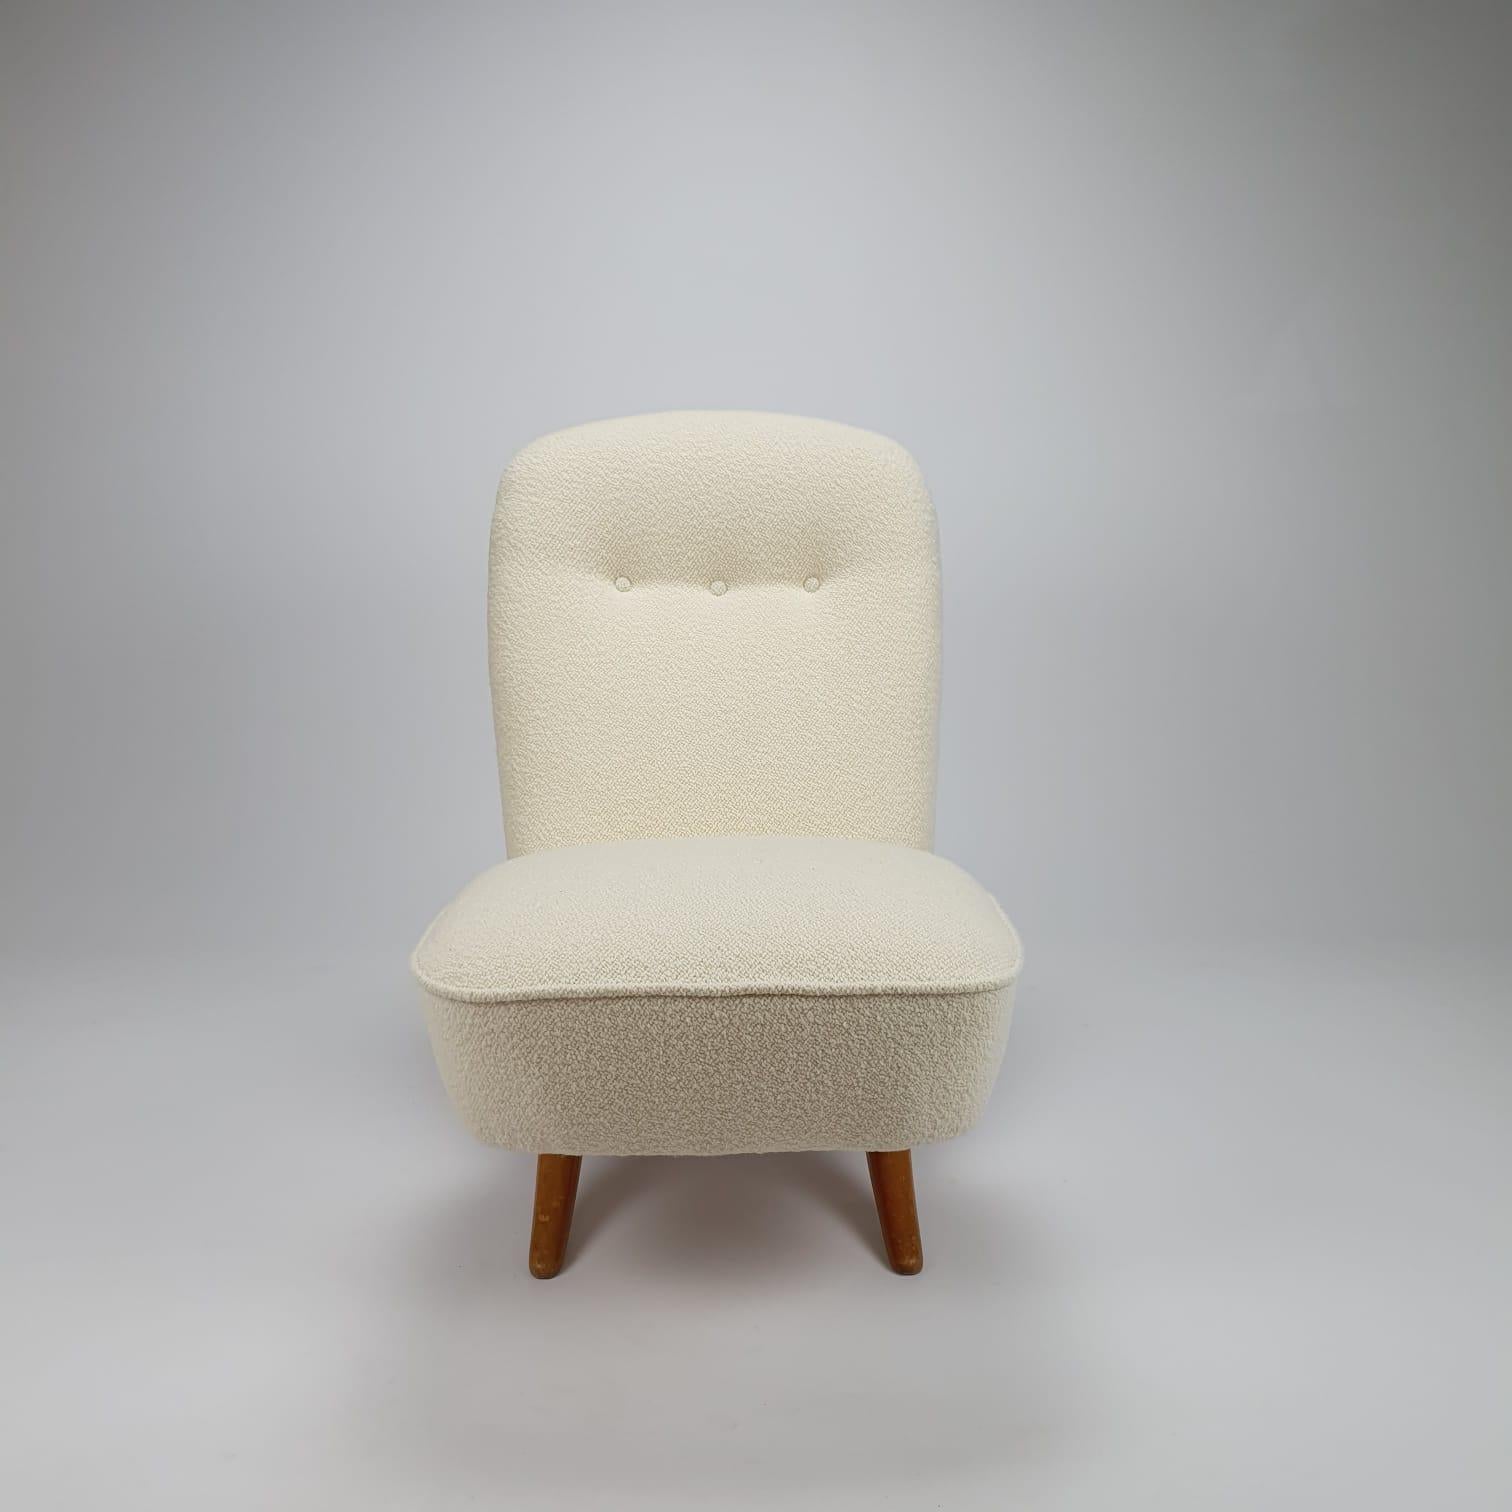 Stunning Mid-Century Modern congo chair, designed by Theo Ruth for Artifort.
Iconic Dutch design from the 50s.
The back and the seater are 2 separate pieces that easily fits together and makes it a unique chair.
The chair is restored with new